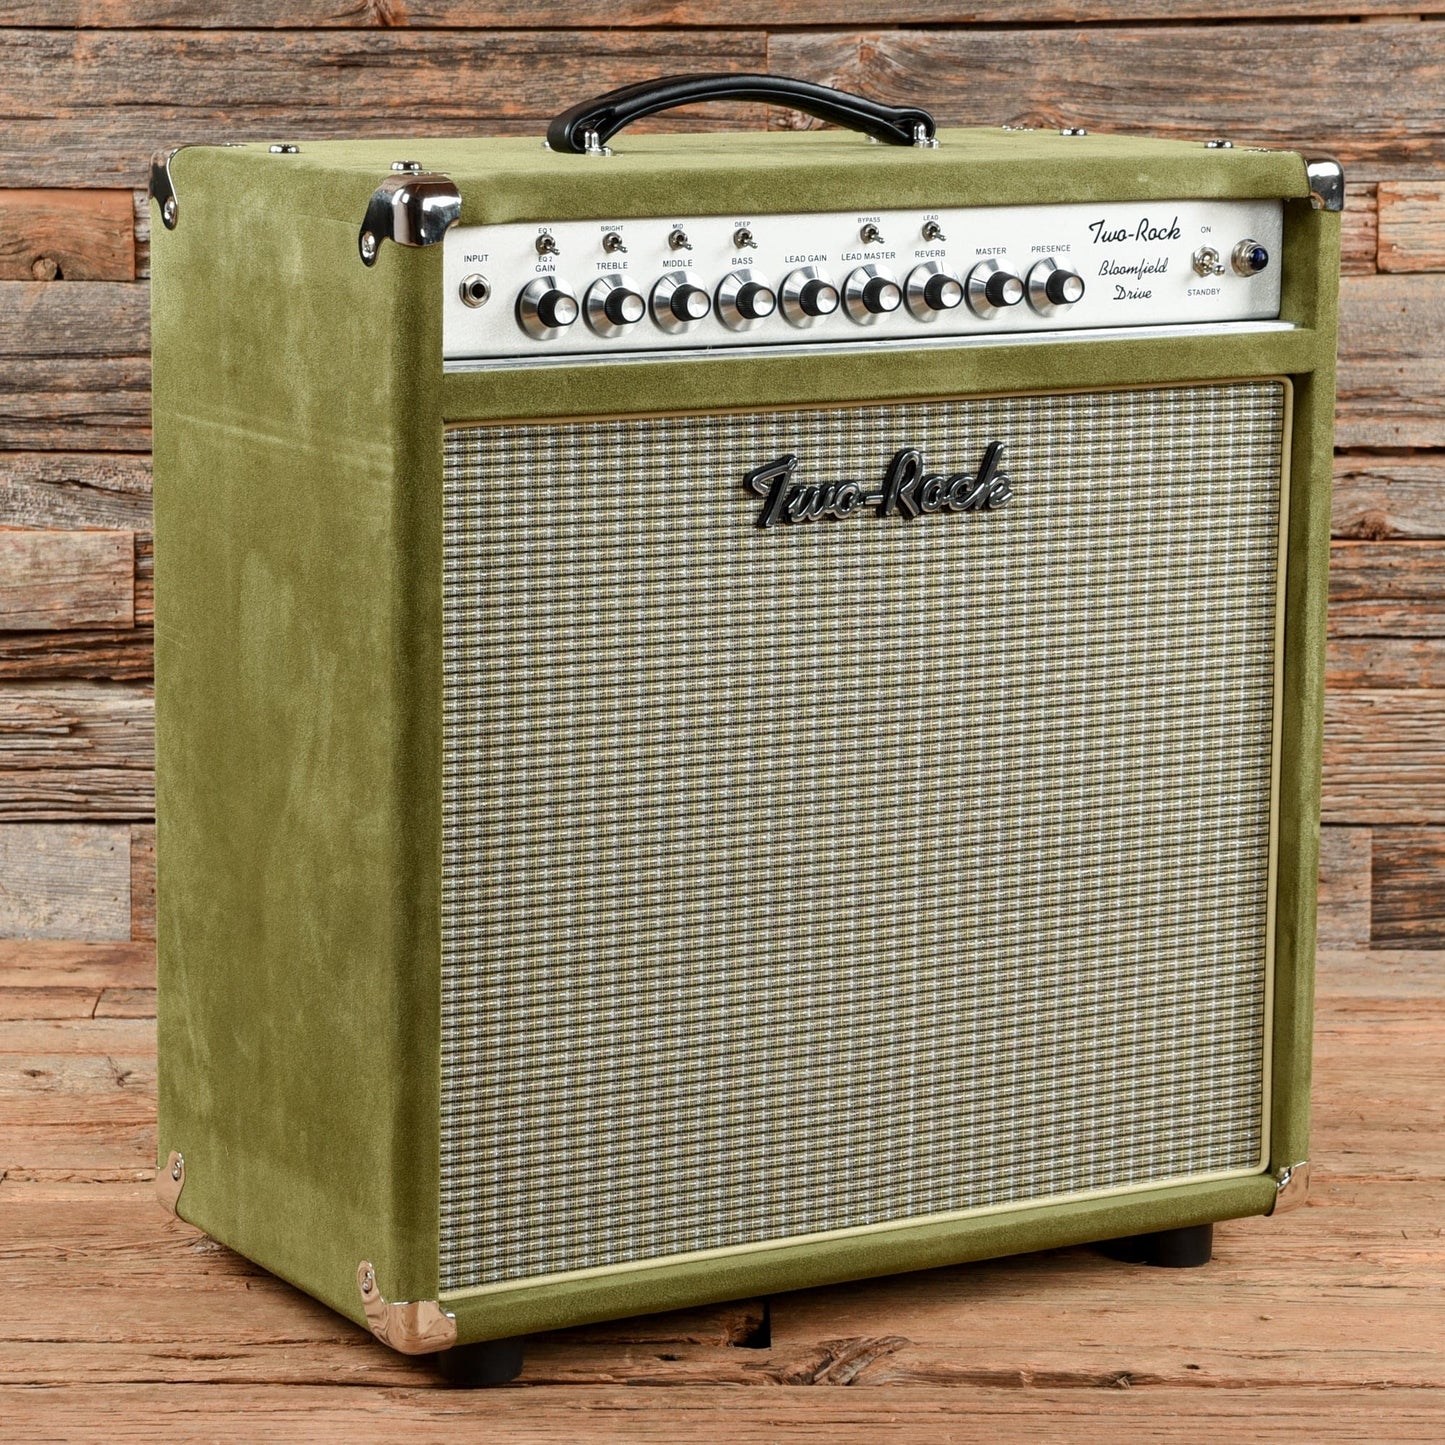 Two Rock Bloomfield 100/50w 1x12" Combo Moss Suede Amps / Guitar Combos